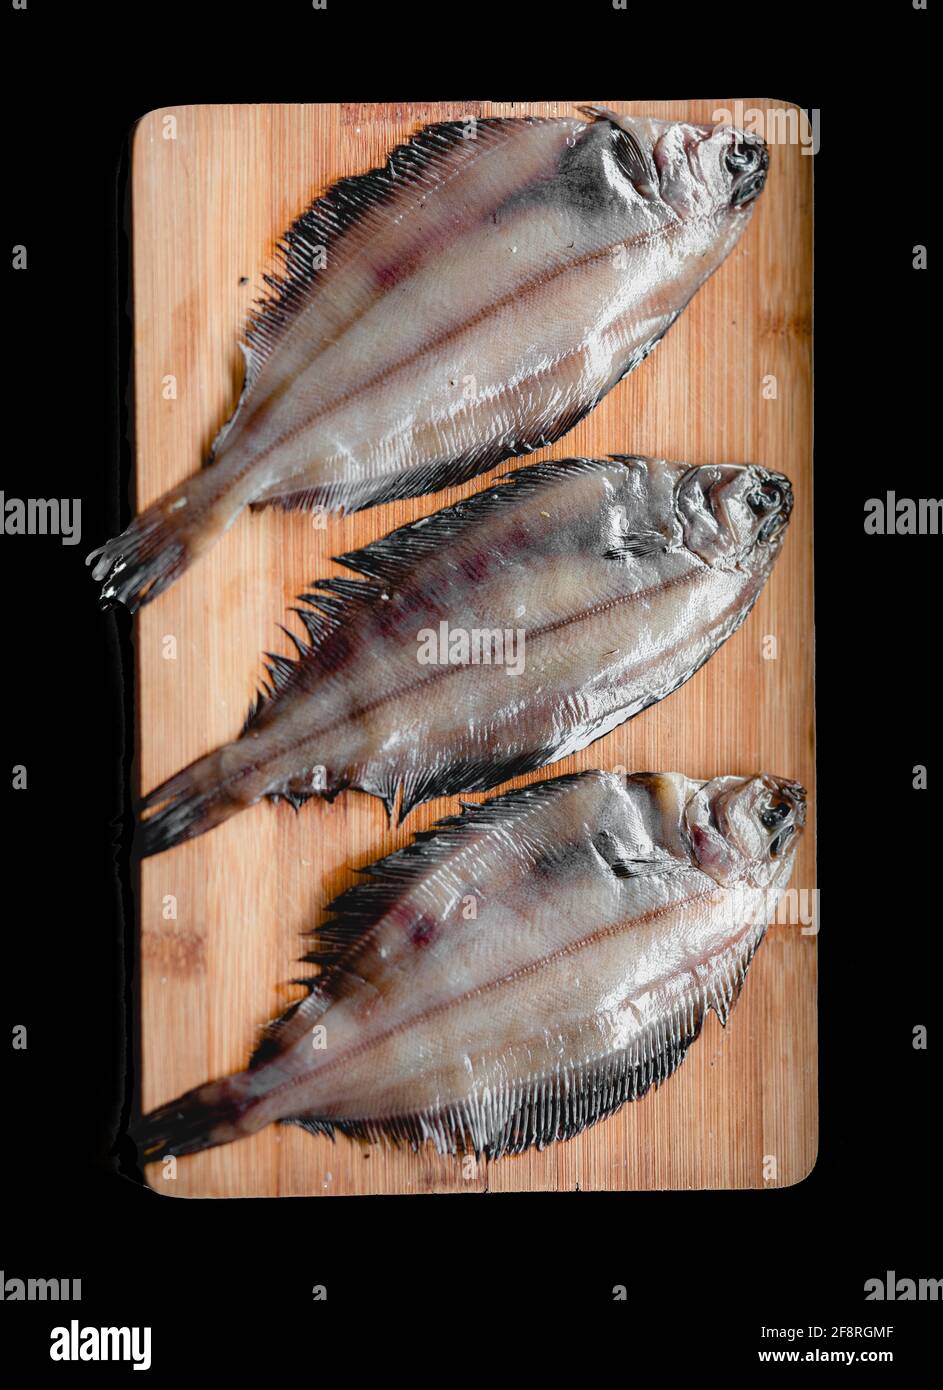 Raw flounder fish, seafood on a wooden cutting Board . Healthy eating concept. Top view Stock Photo